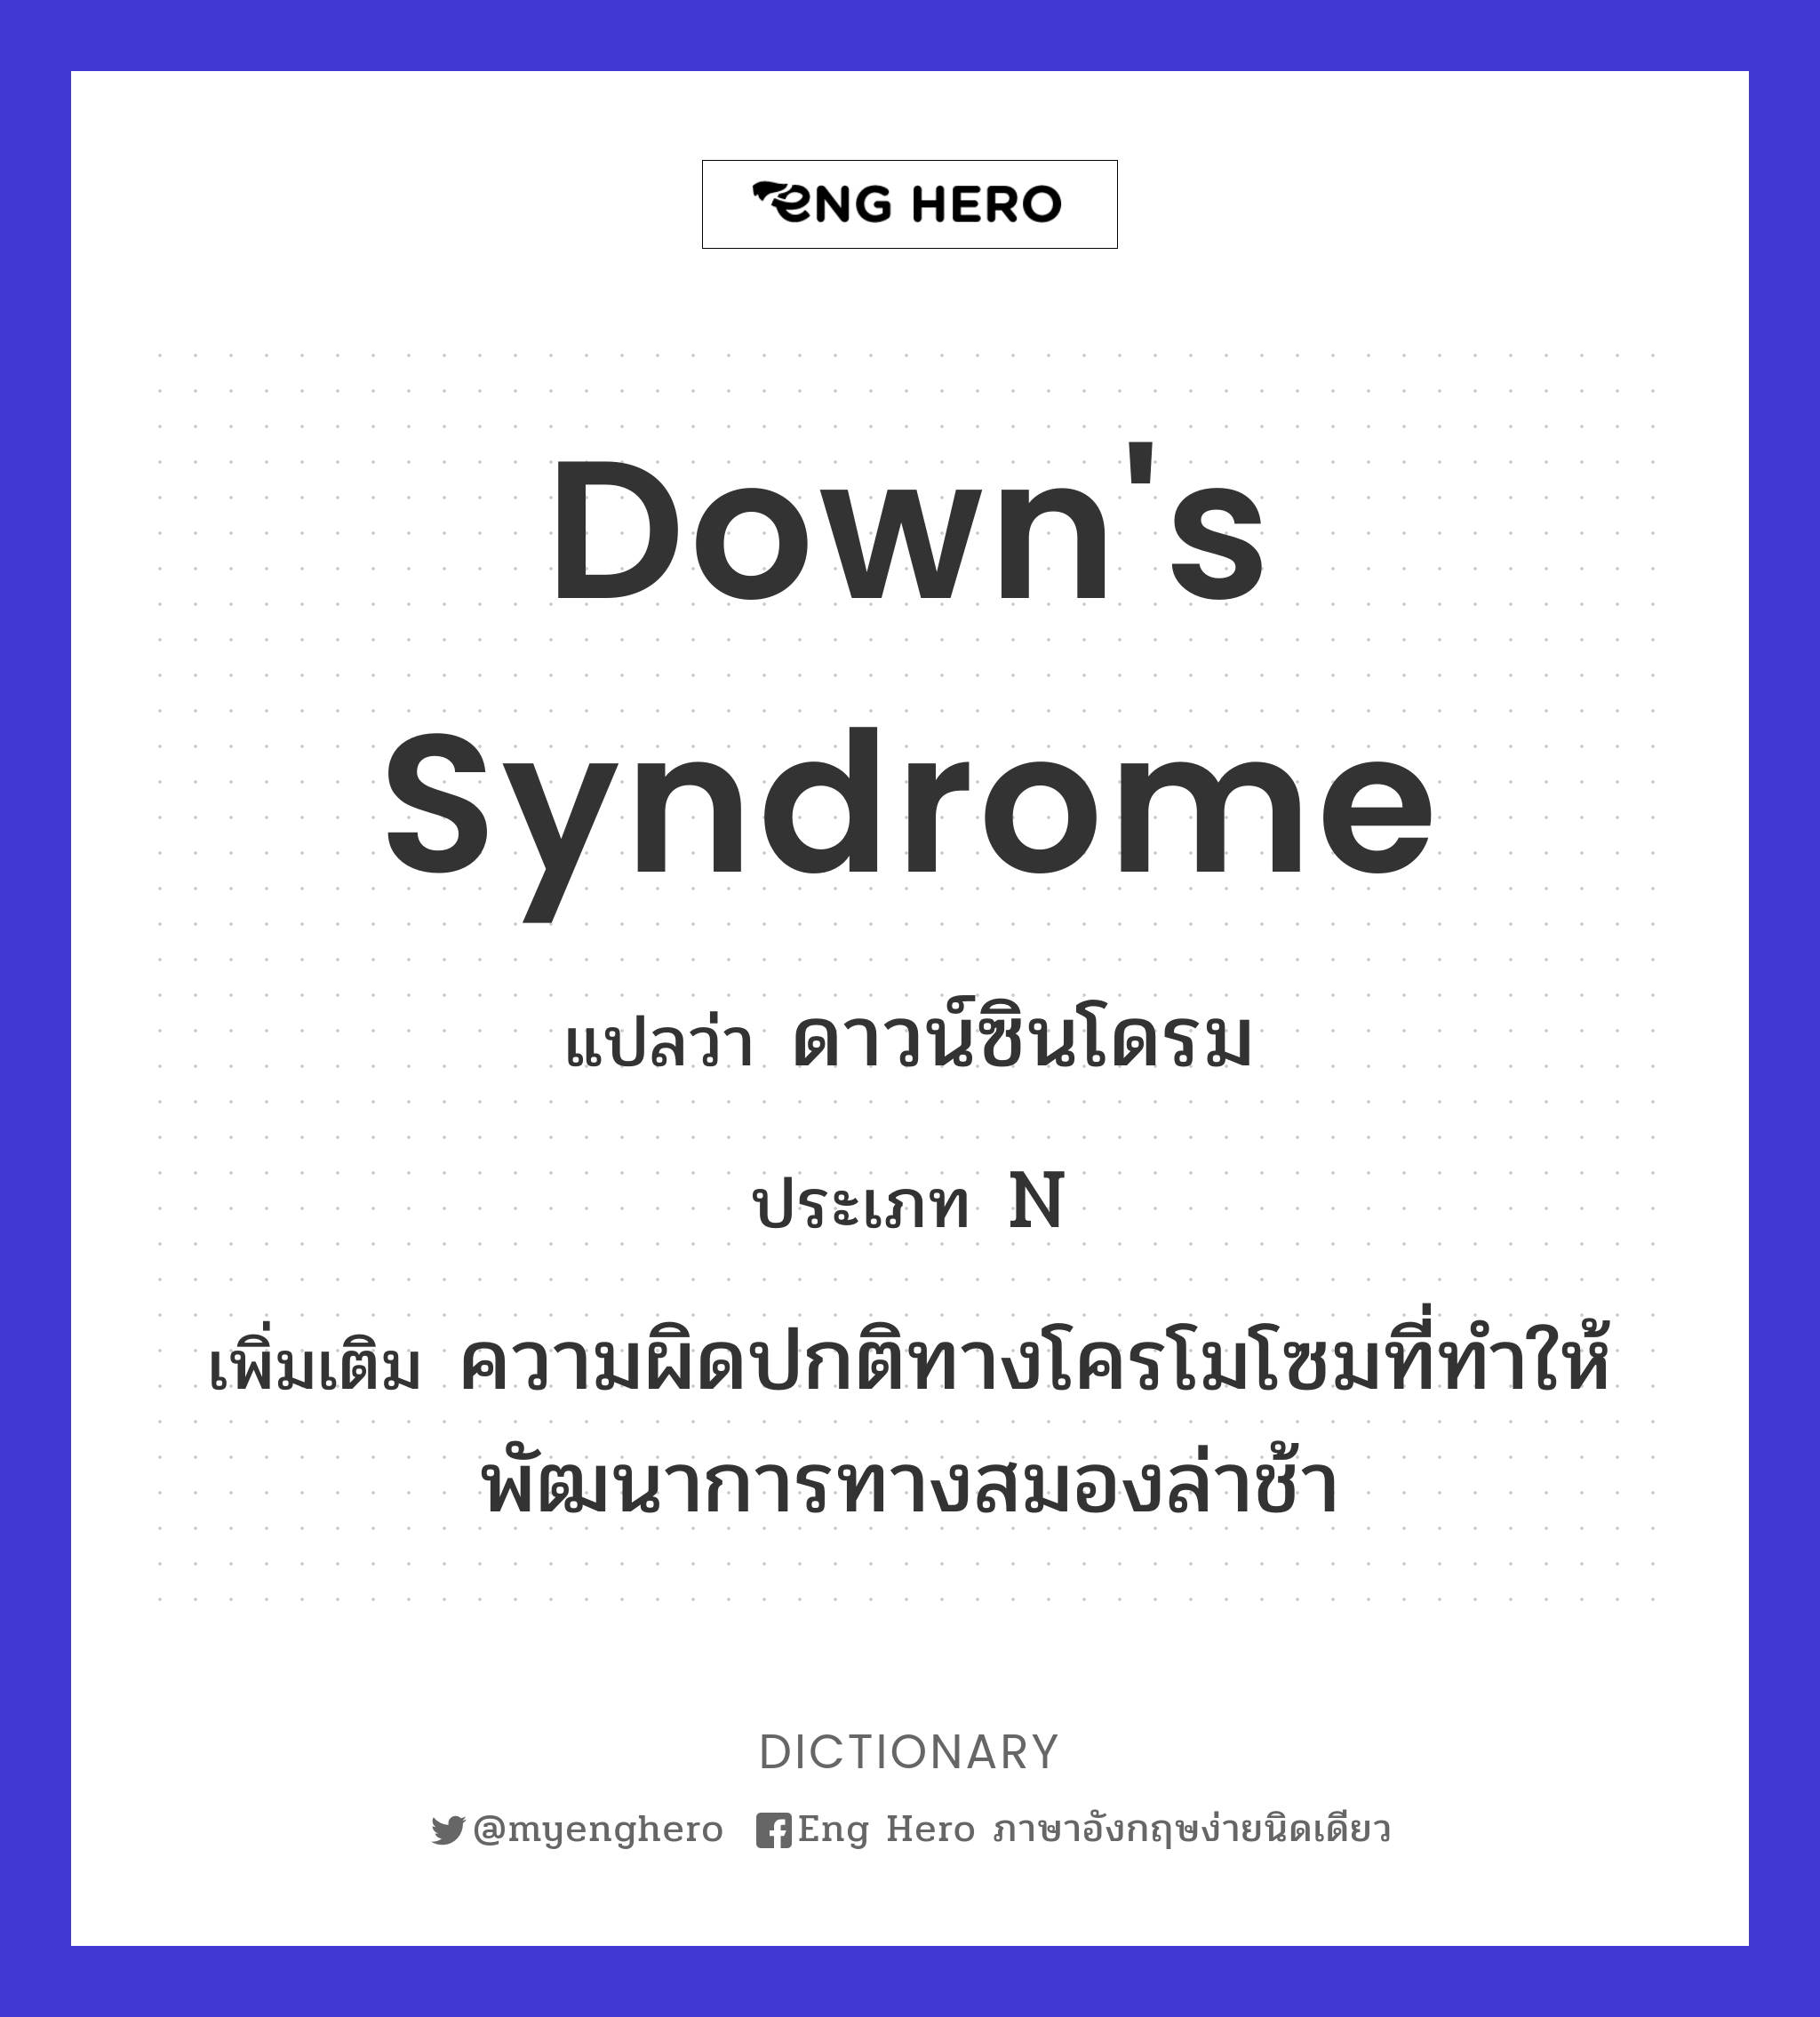 Down's syndrome